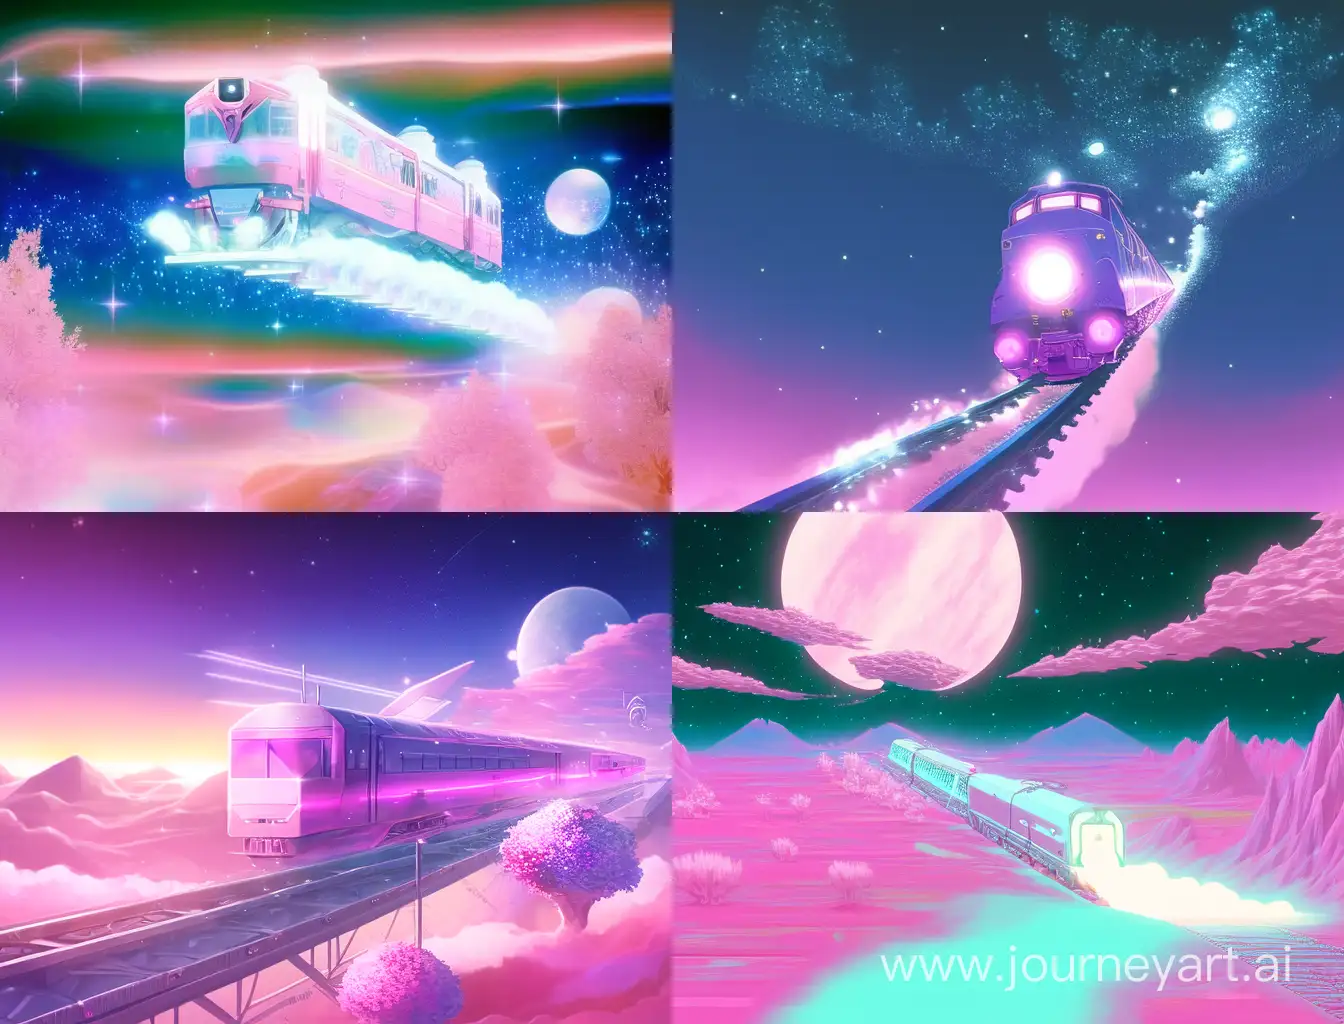 A train flying In the air on Mars, cute, cute, soft, dreamy, comfortable for the eye, blue and pink, simple, beautiful, glowing white energies are scattered from the train as it flies at high speed